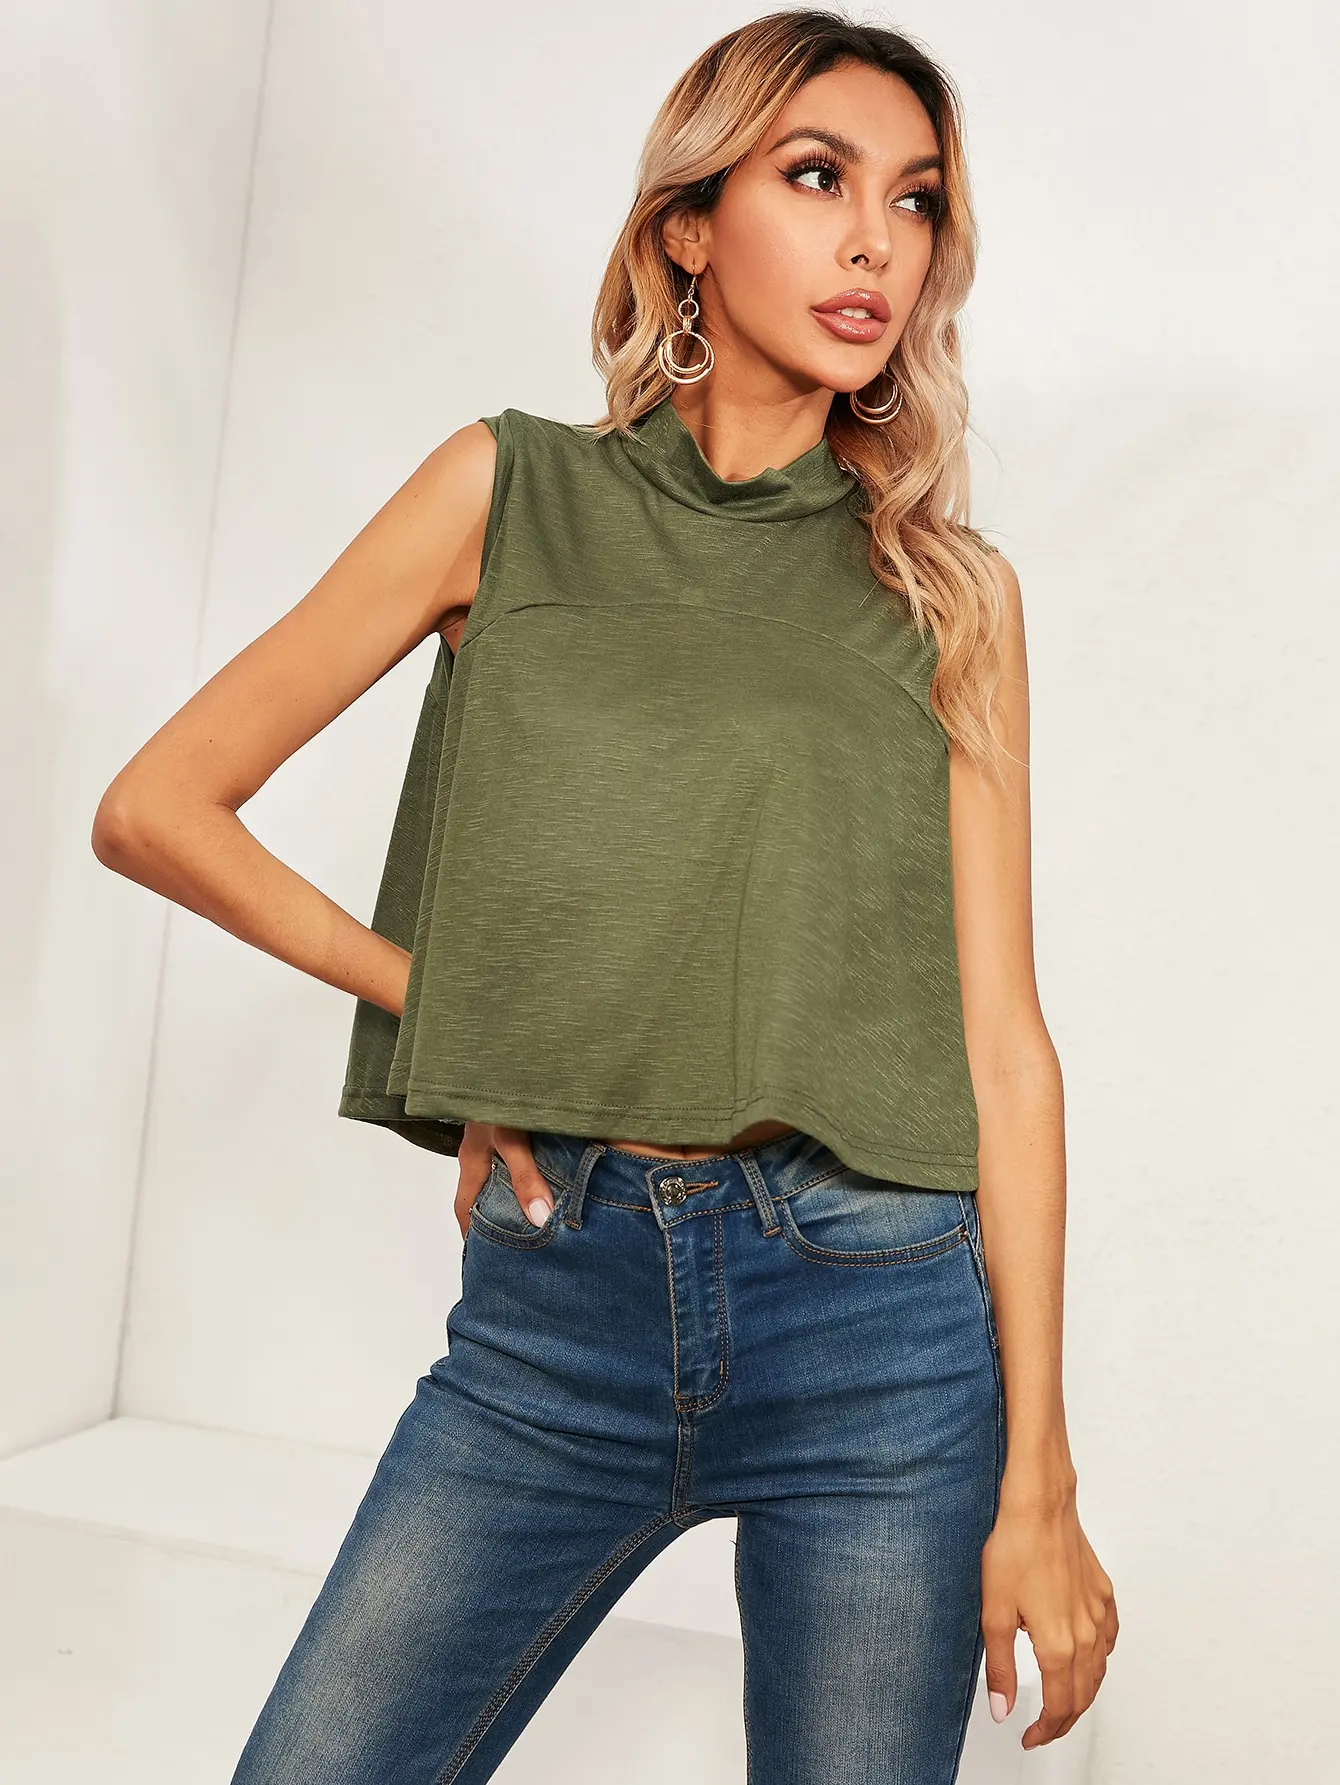 Stock Clearance Sale Online Clearance Sale In Bulk Cheap  Low Price Clearance t Shirts For Sale Women Green Halter Neck t-Shirt